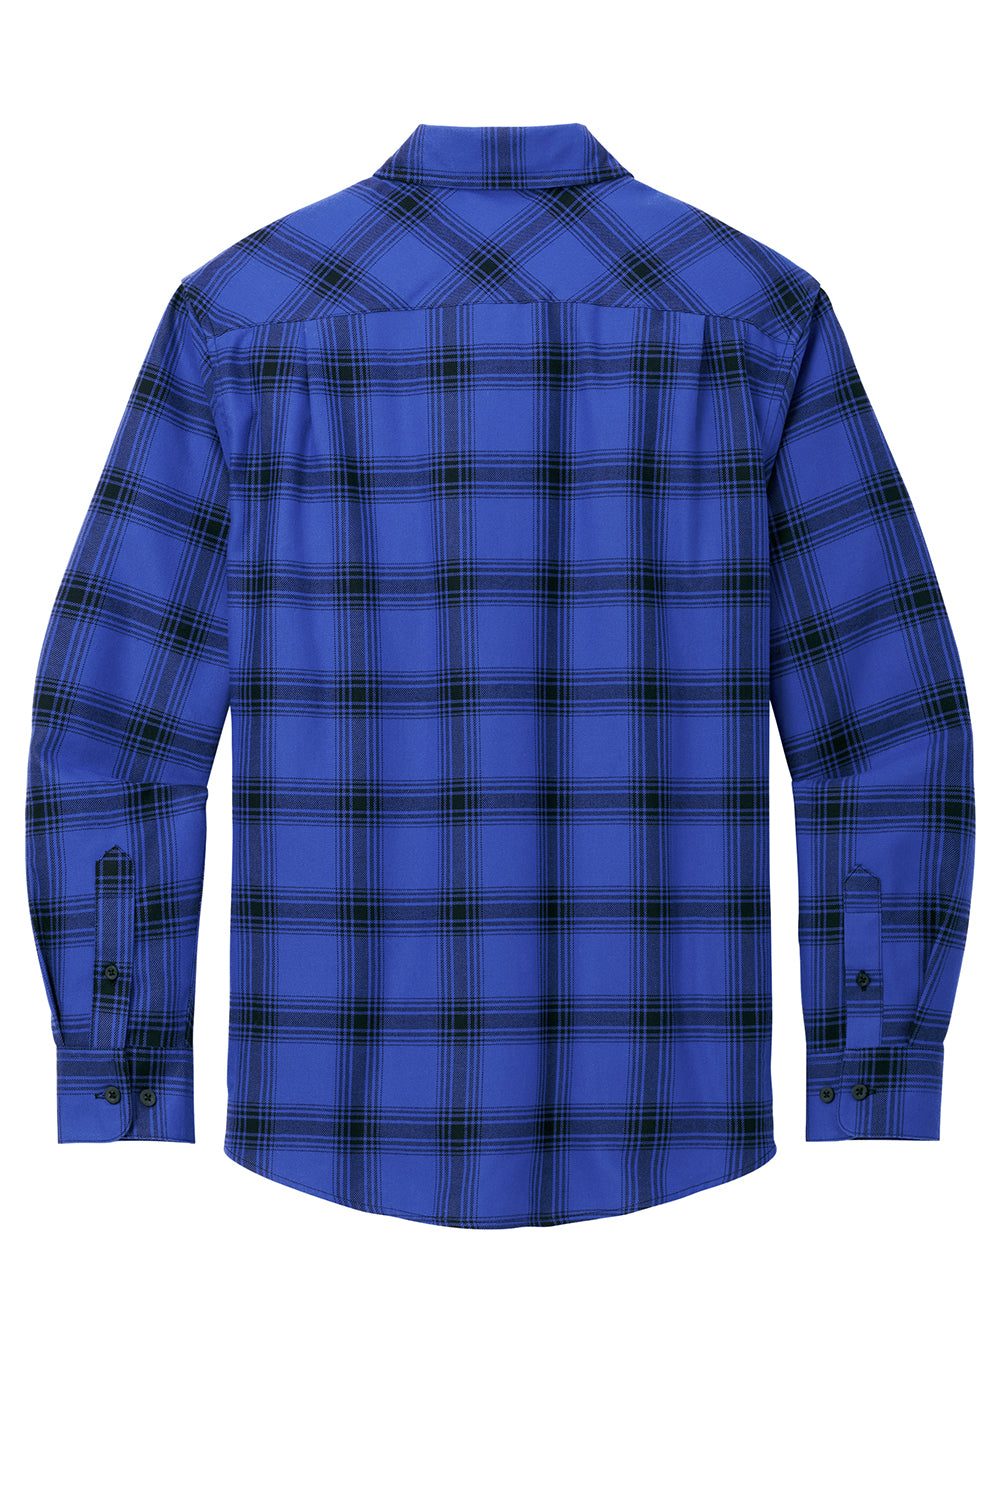 Port Authority W668 Mens Flannel Long Sleeve Button Down Shirt w/ Double Pockets Royal/Black Plaid Flat Back